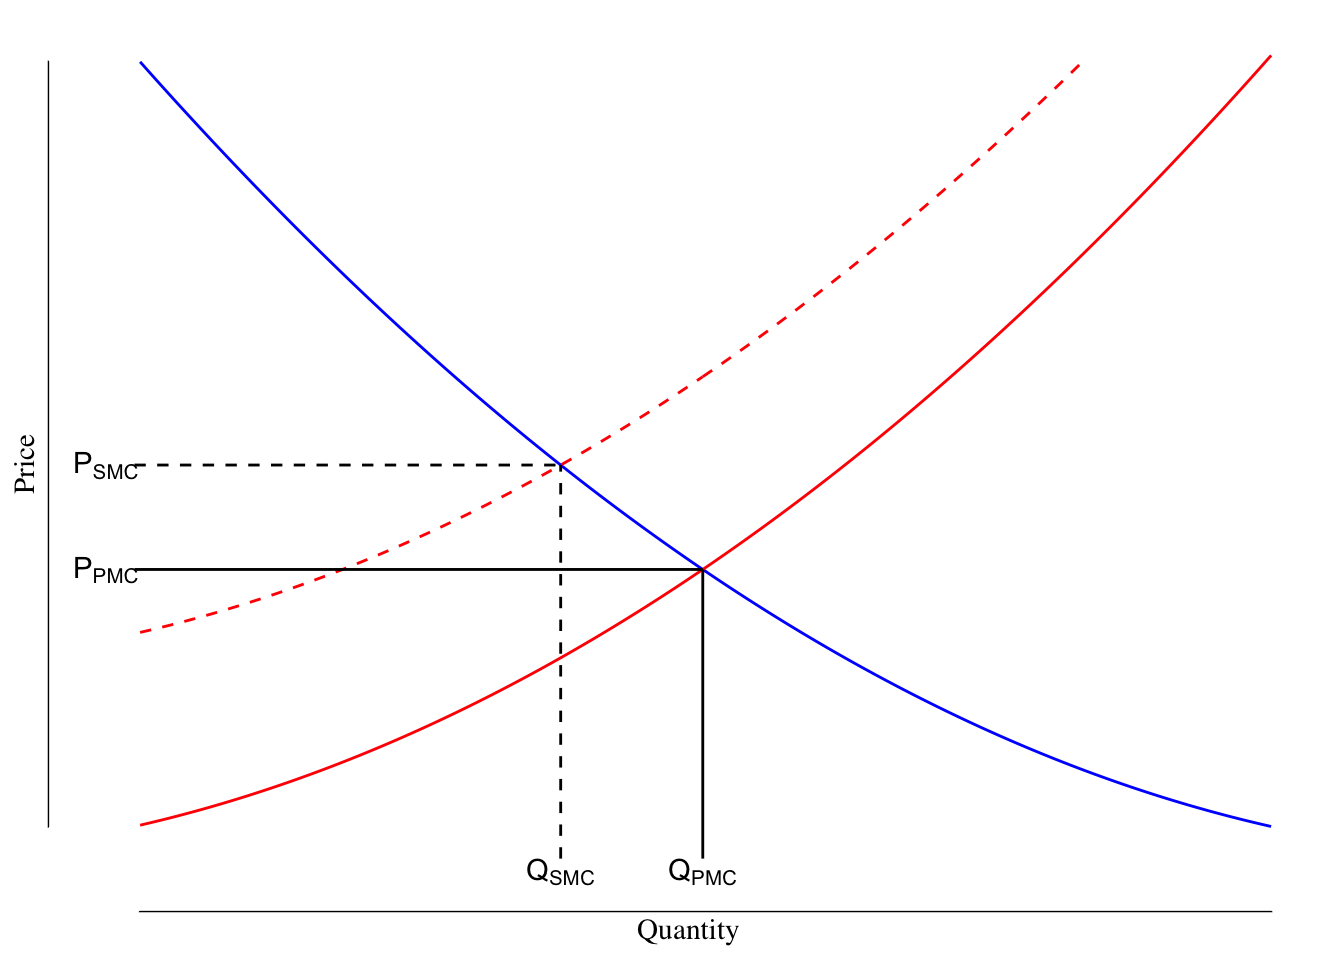 Demand, Private and Societial Marginal Cost Curves in a Market with a Negative Production Externality. The blue line is the demand curve while the red lines denote the PMC (solid) and SMC (dashed) curves. The black lines measure the quantity and price using the PMC (solid) and SMC (dashed) marginal cost curves. Using the PMC as the supply curve results in a lower price and an increased amount of prodution compared to what is socially optimal.